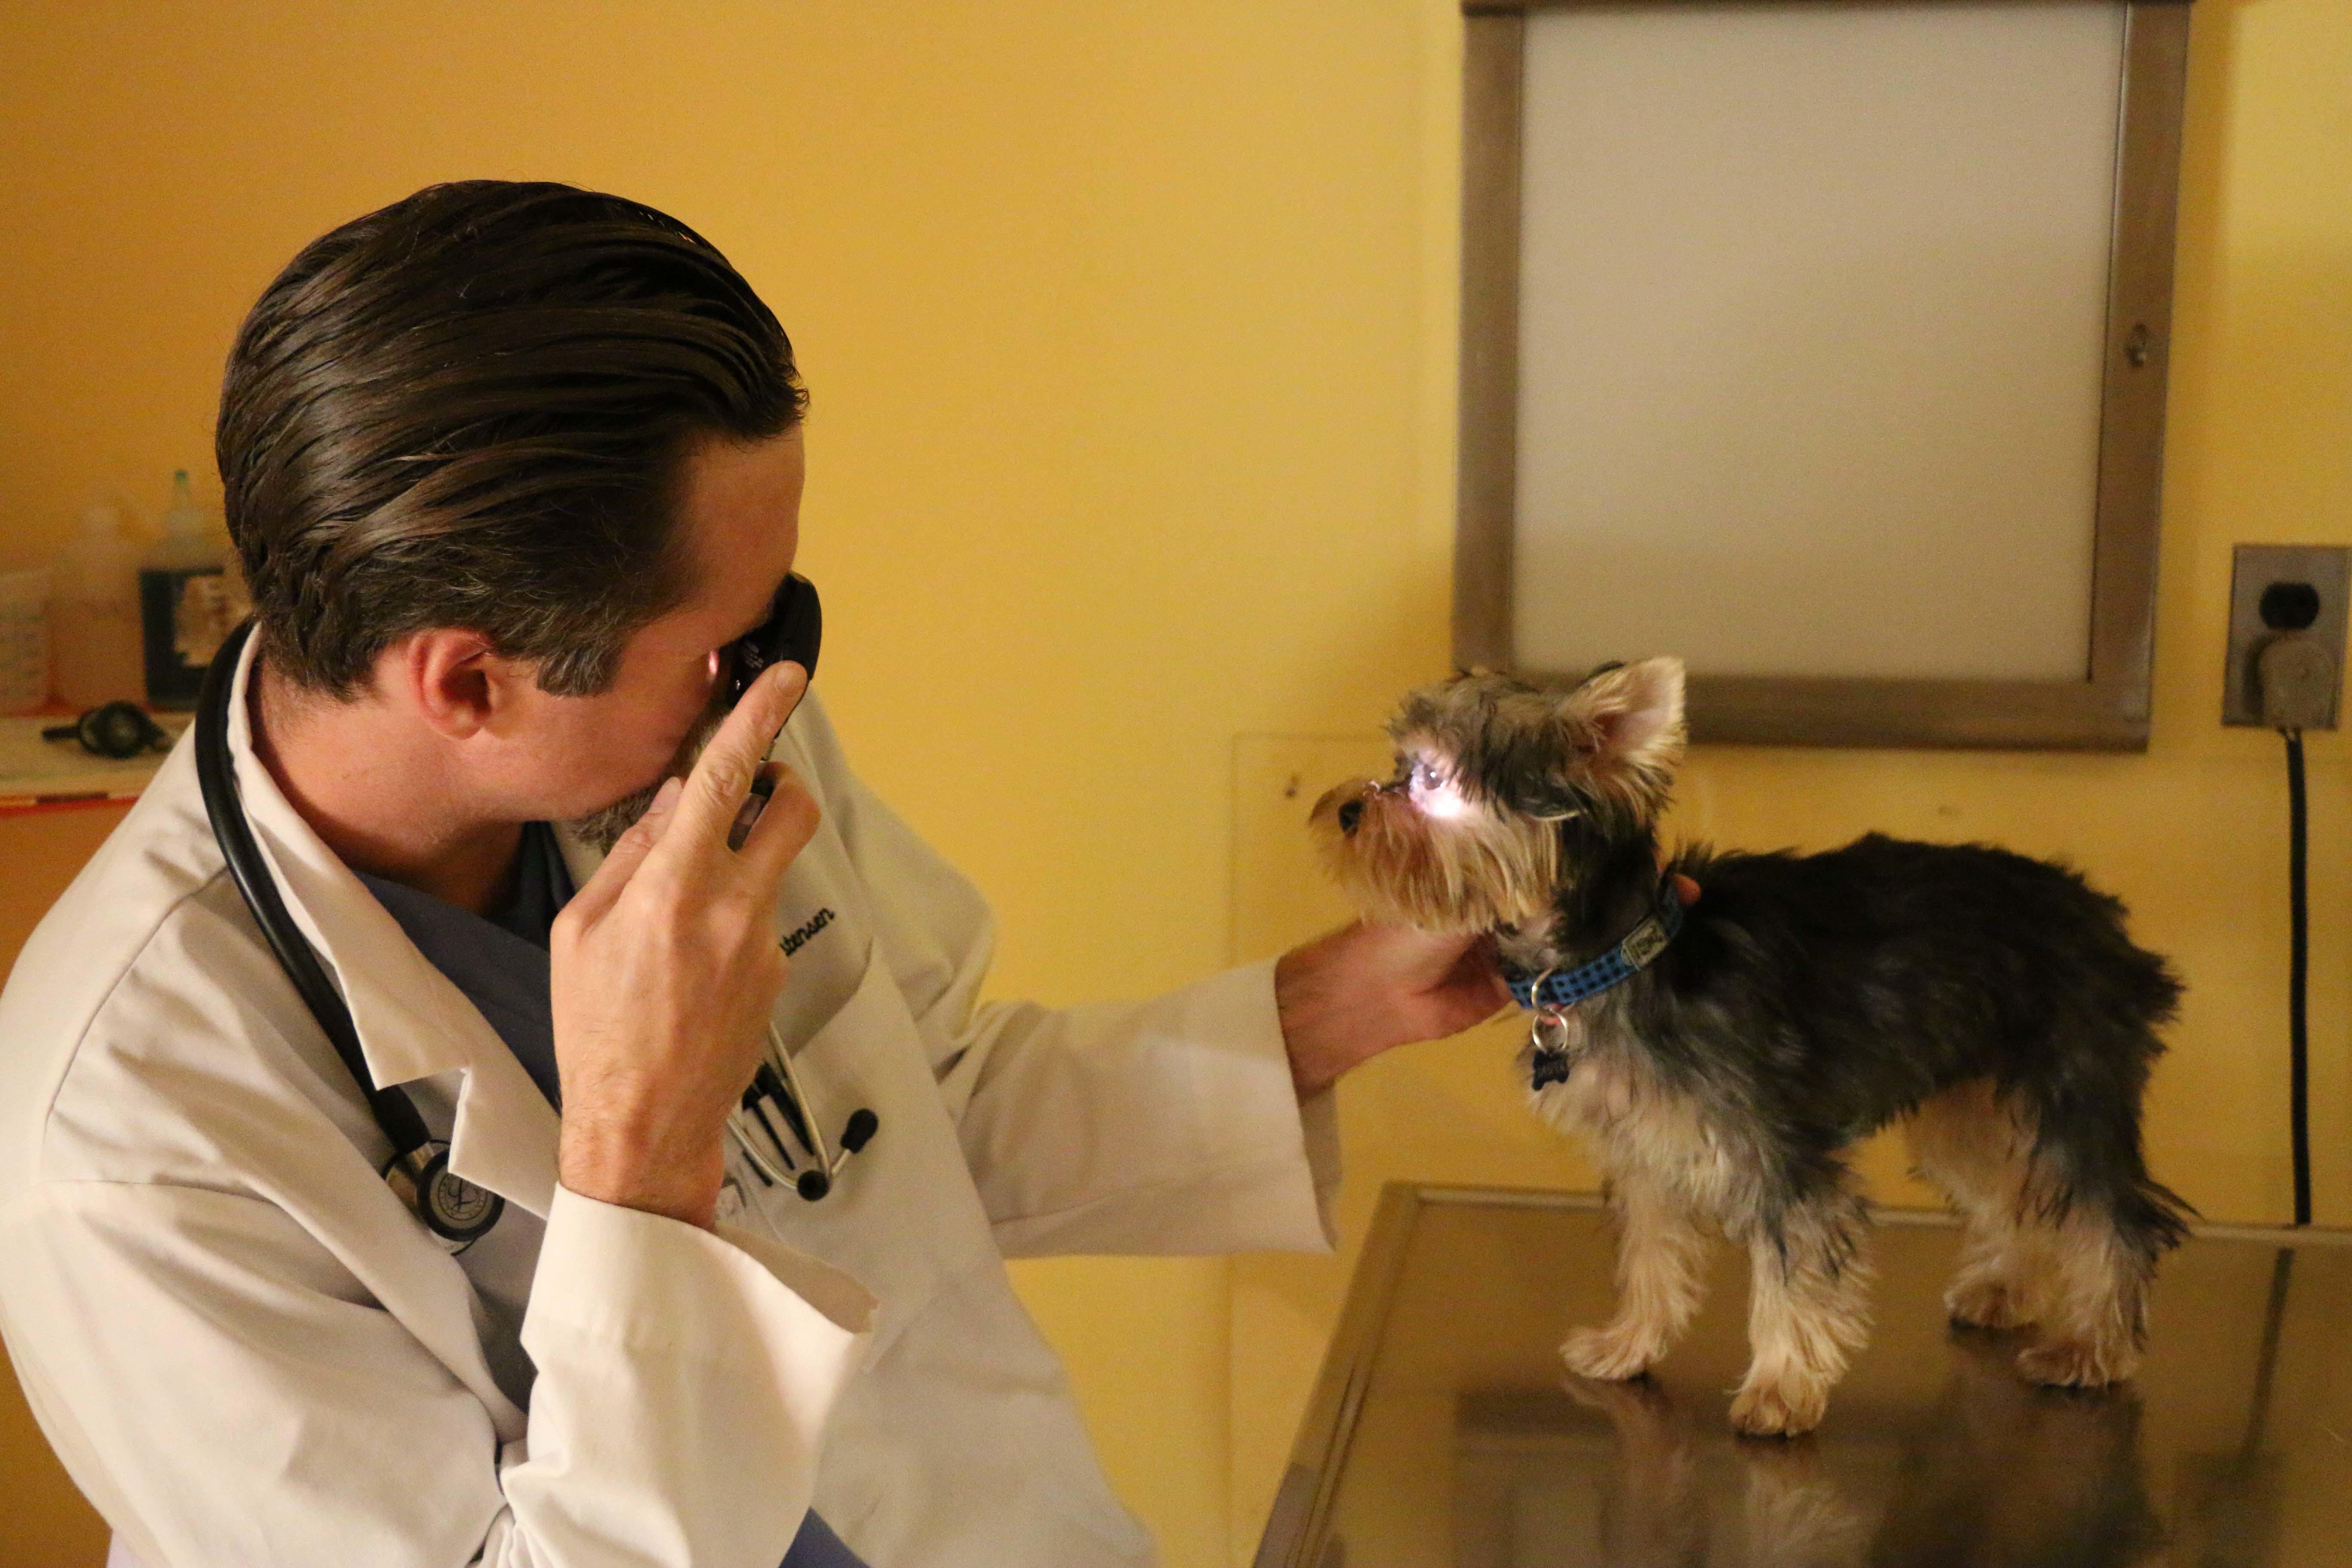 Using an otoscope, Dr. Christensen checks to make sure this dog’s eyes are clear, white, and bright.